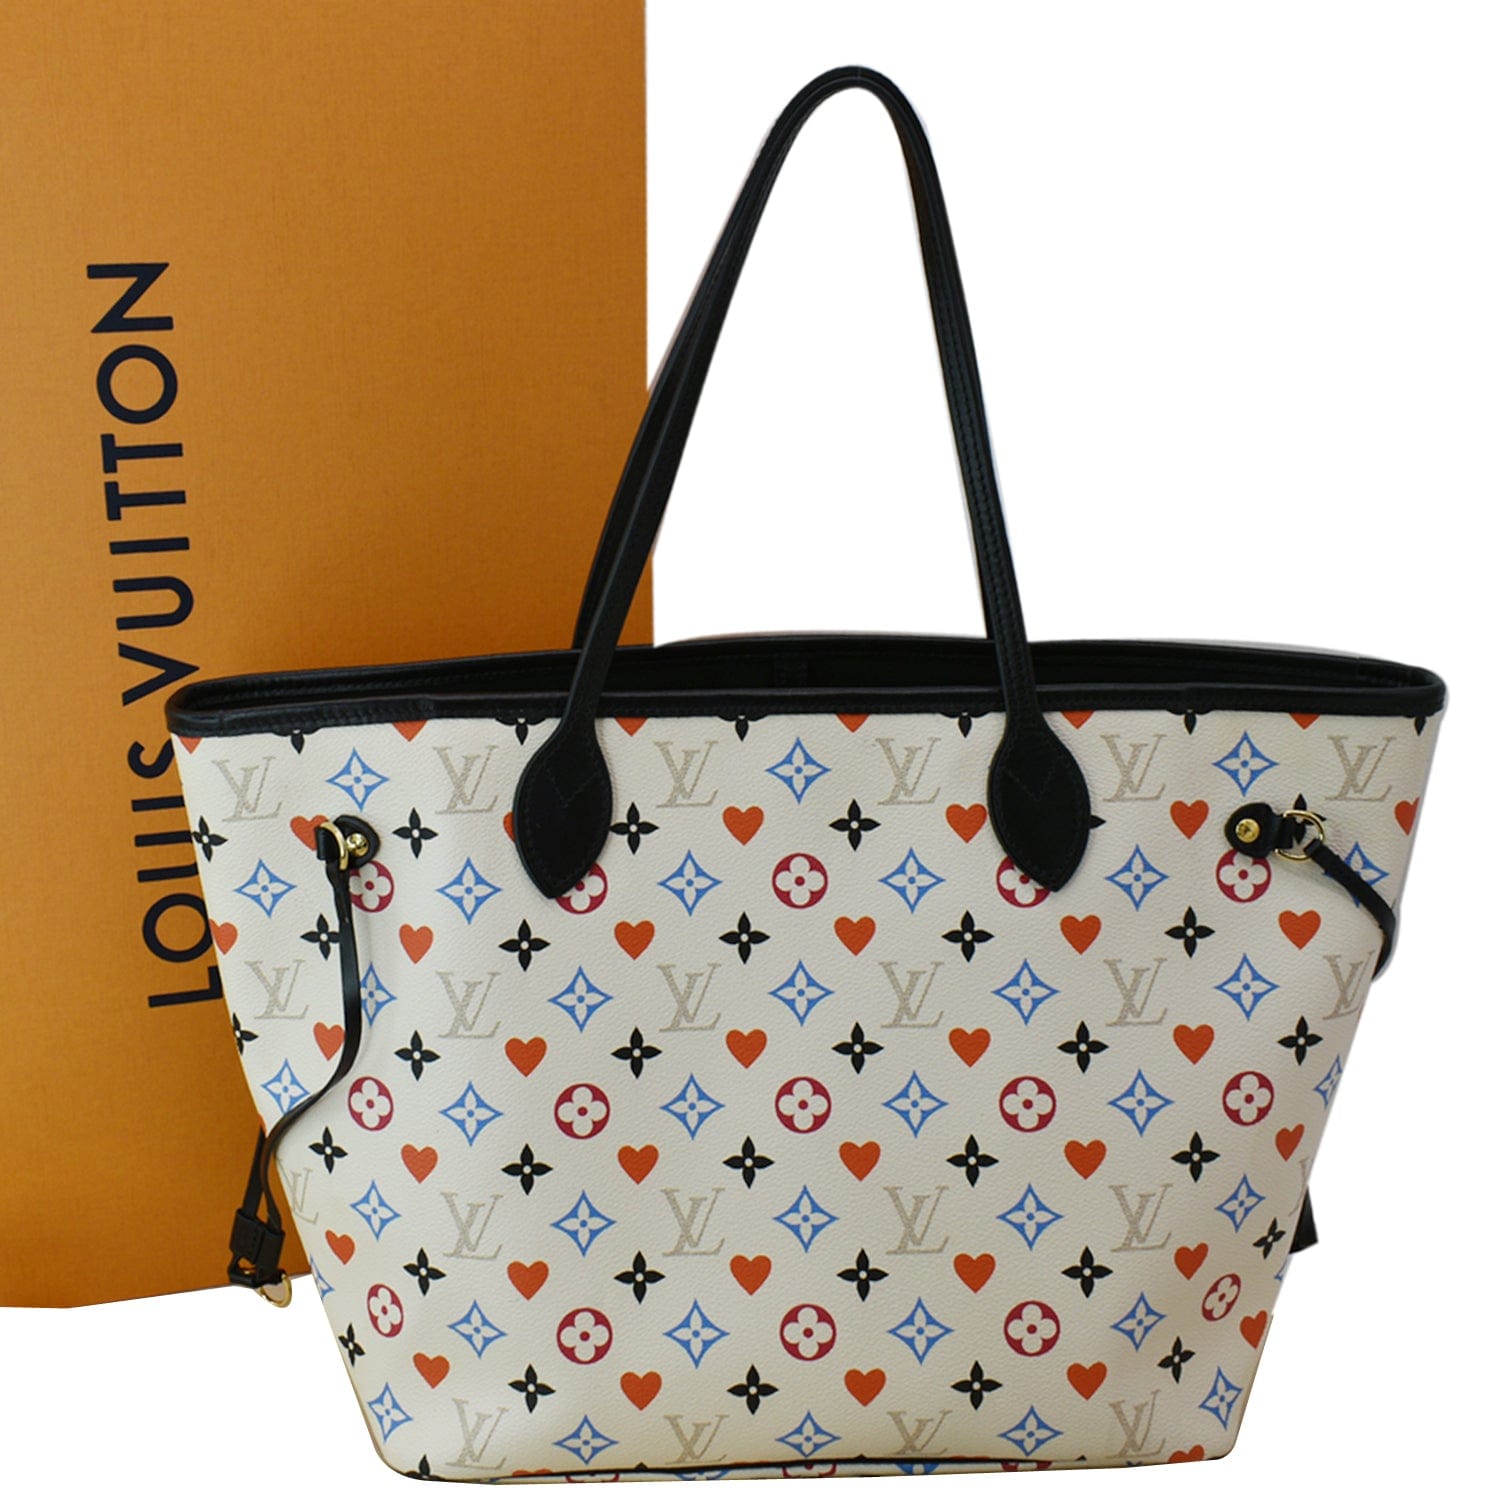 Louis Vuitton Game on Neverfull mm Monogram Canvas Tote Bag Black